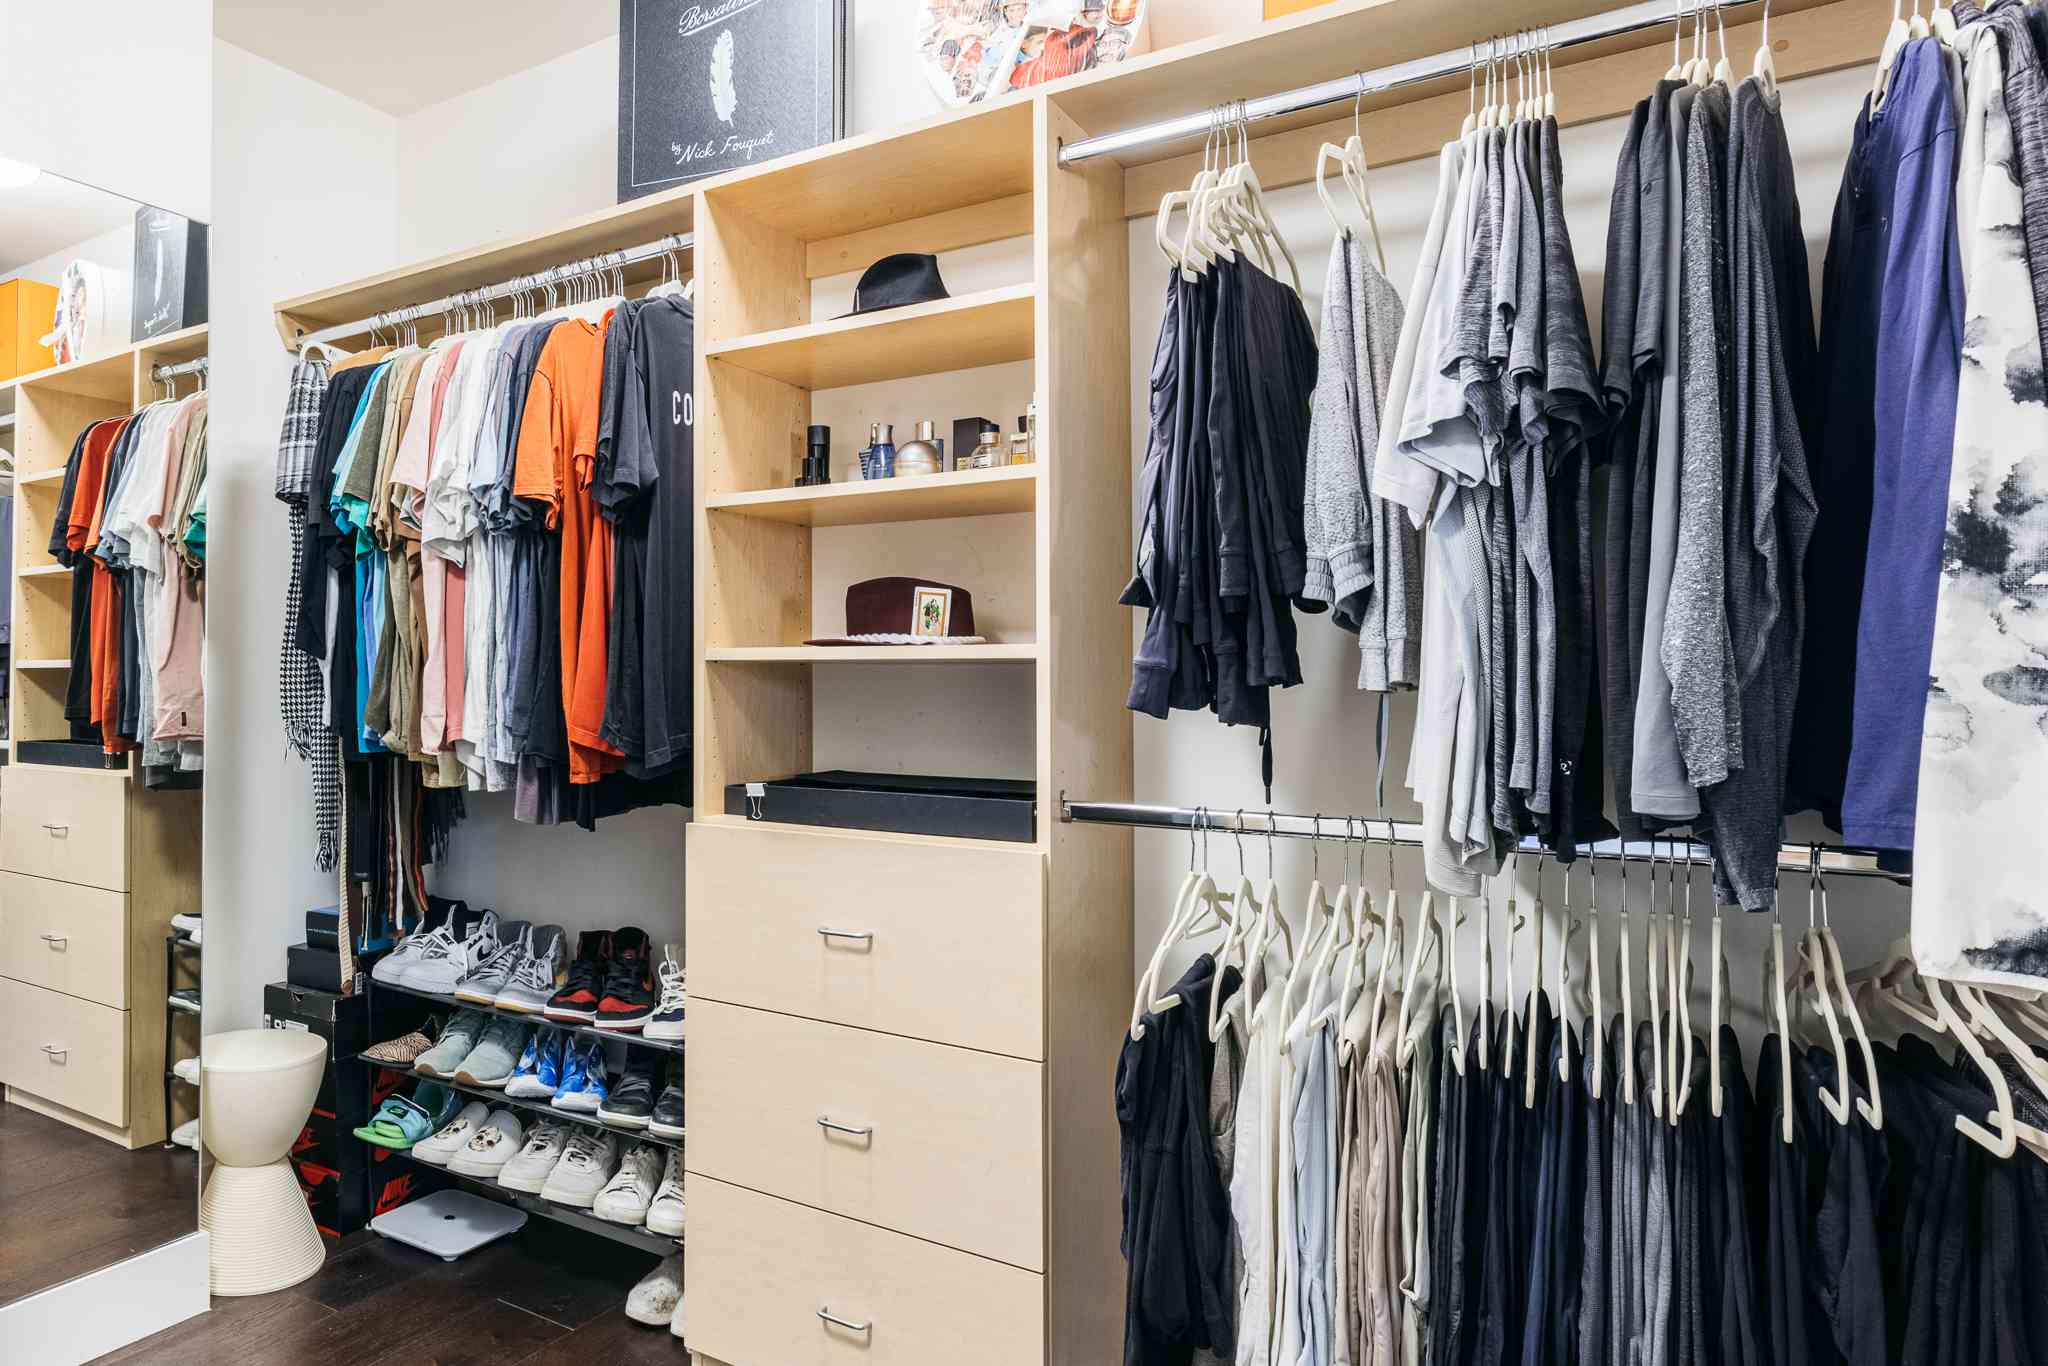 Optimize Your Closet Space with My Coat Hangers and Hanging Racks for Clothes